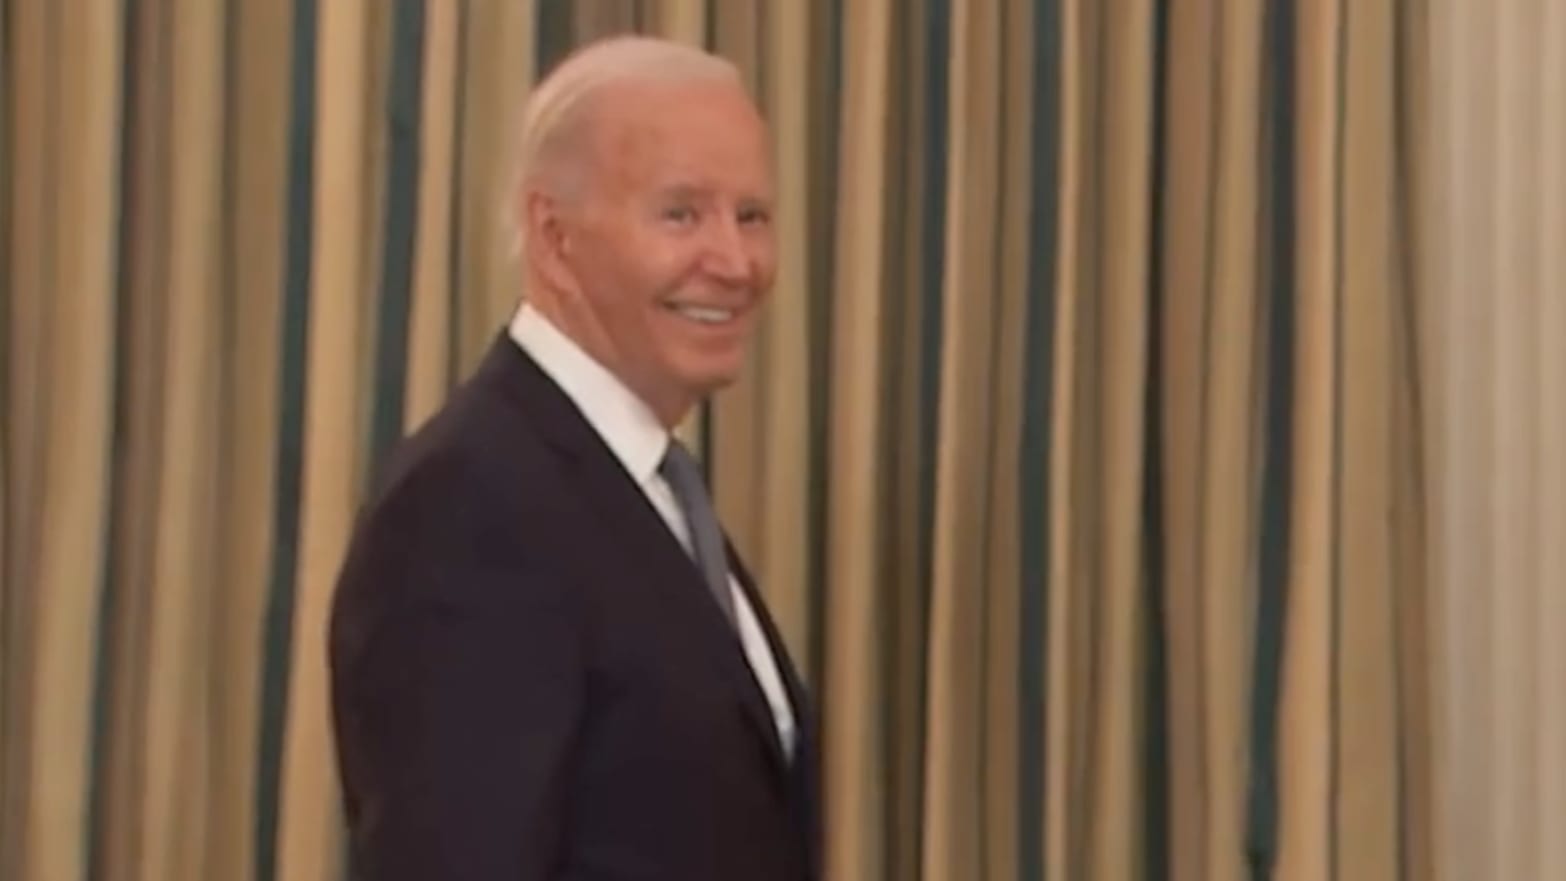 President Joe Biden simply smiled when asked if he was responsible for Trump’s conviction.